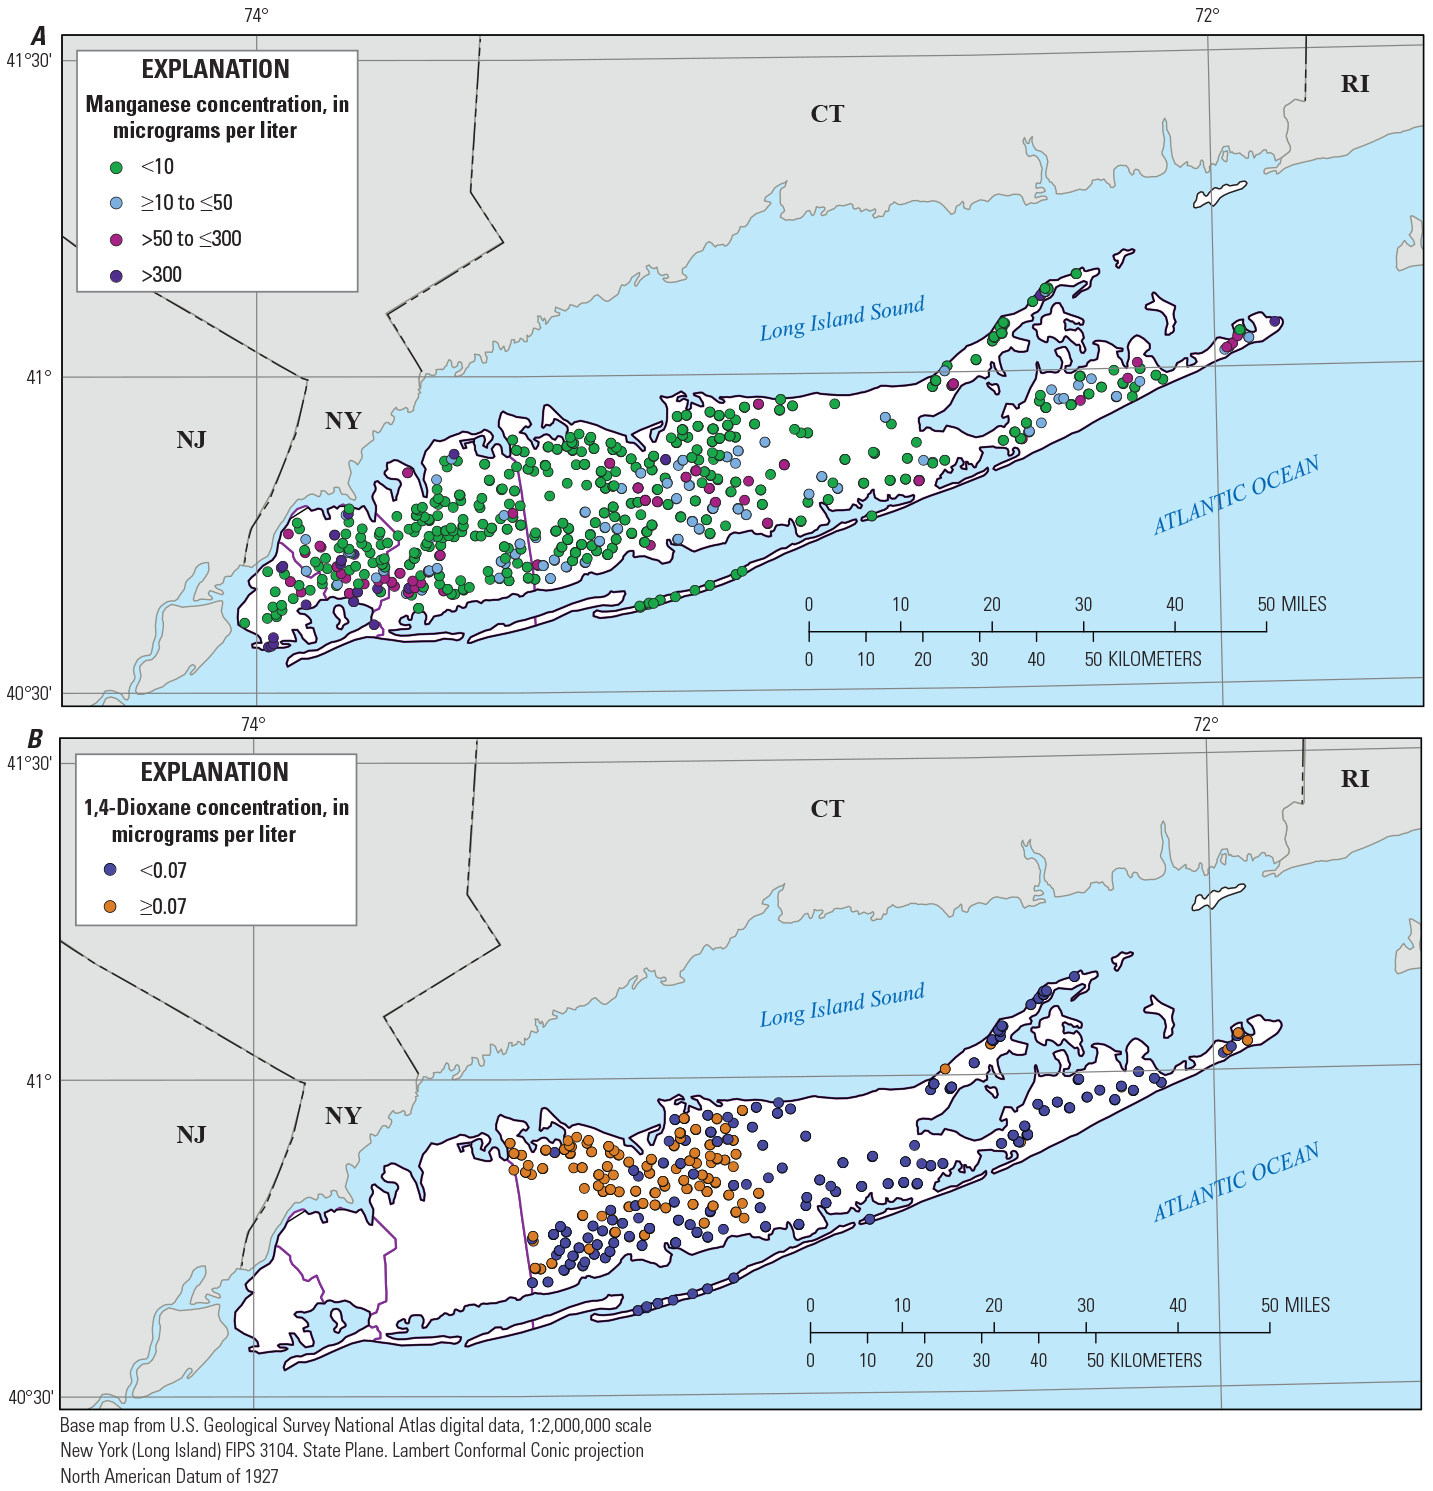 Manganese and 1,4-dioxane concentrations in groundwater